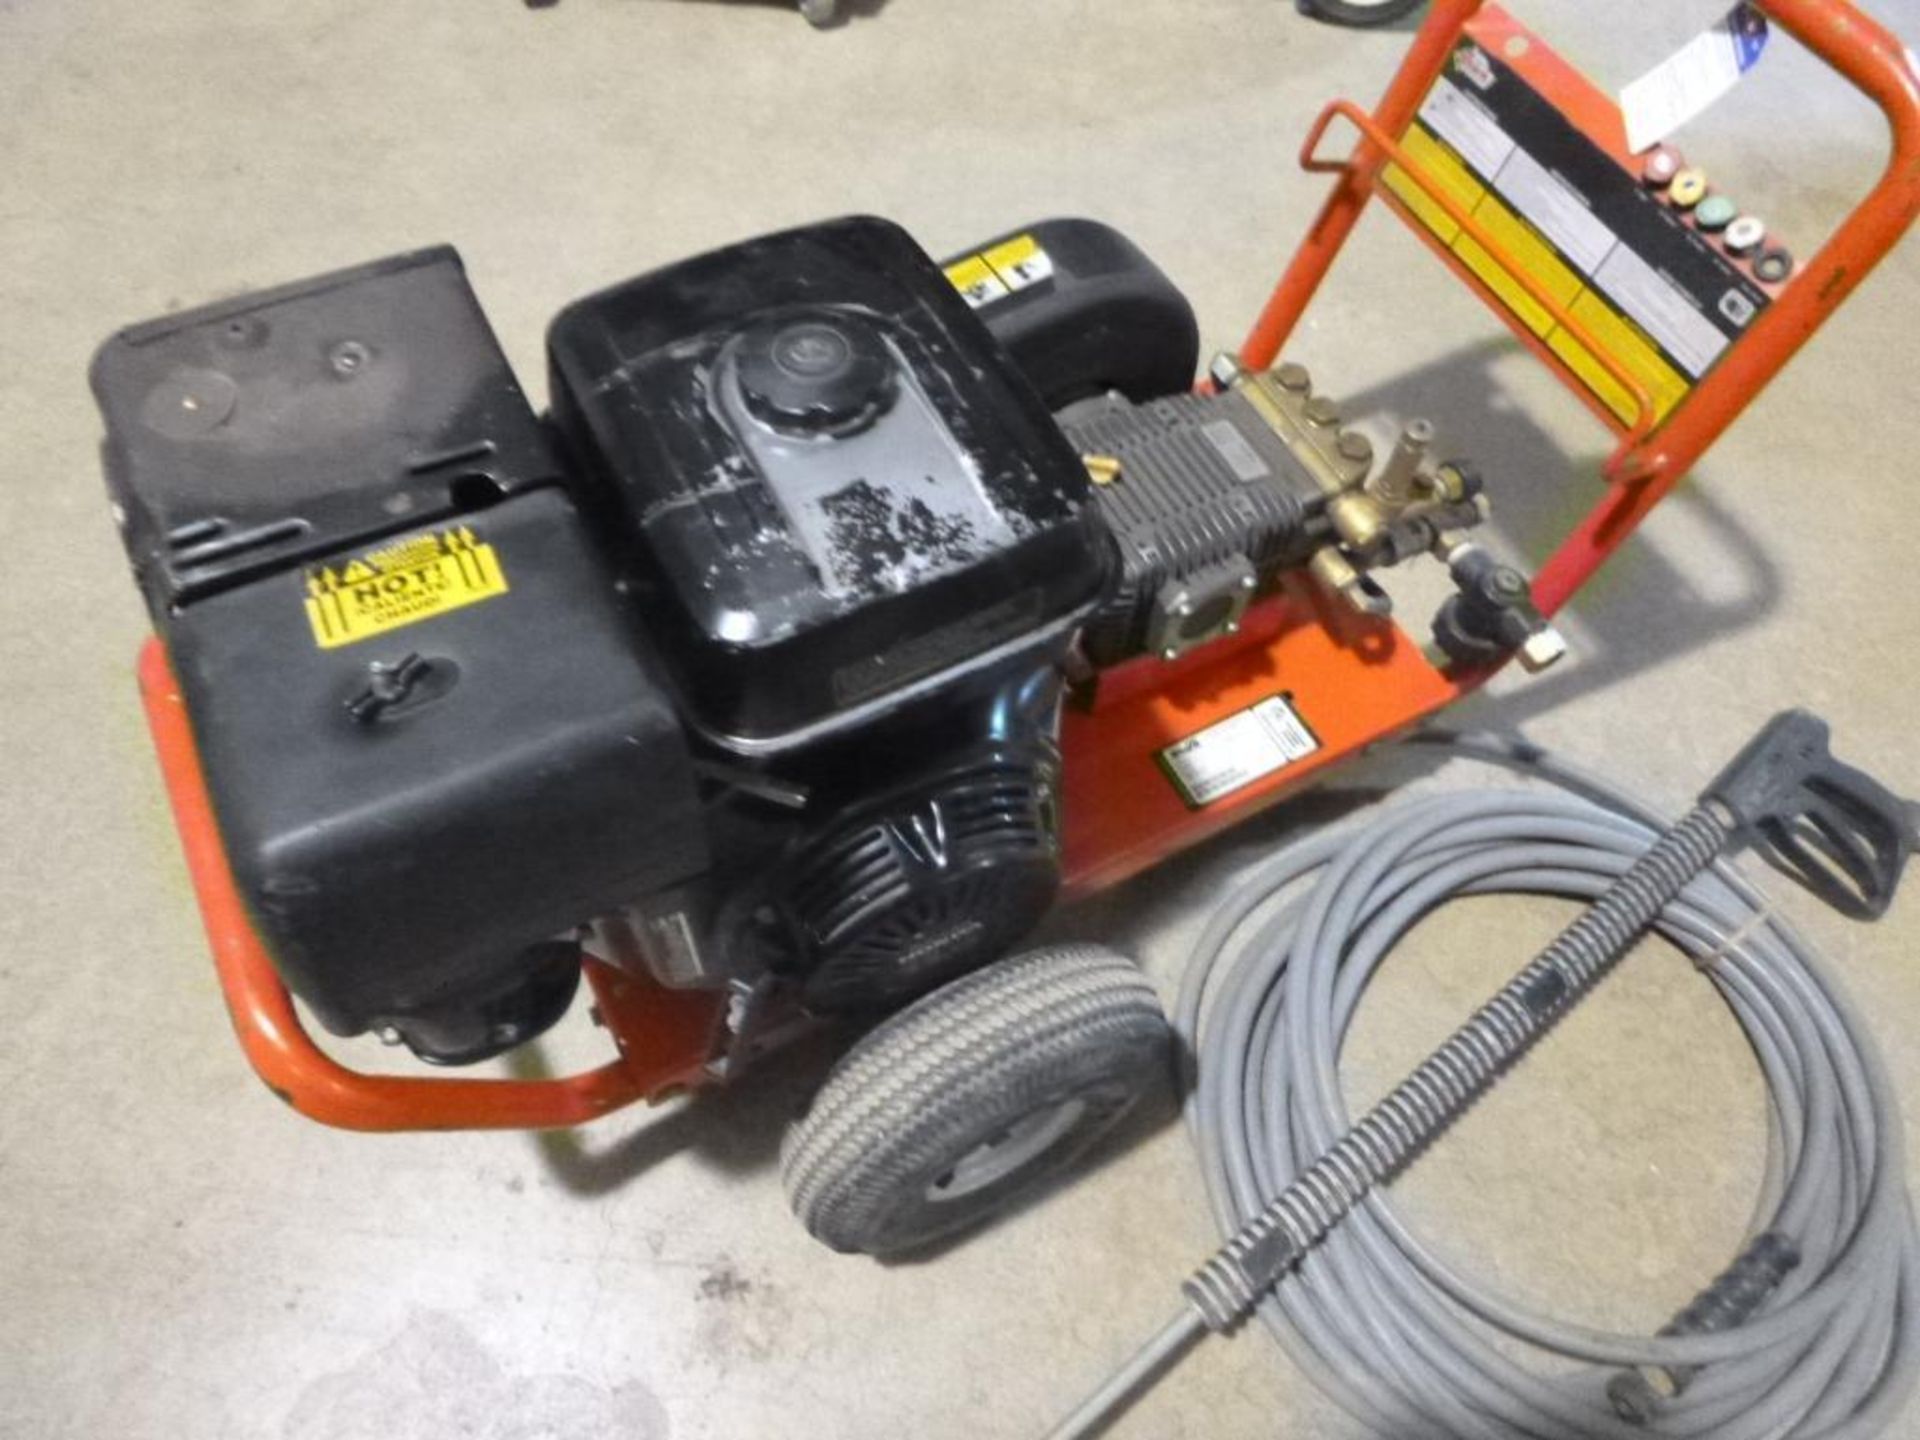 LOT: Washer, Pressure Cold 3000 PSI,; Washer, Pressure Hot 3000 PSI, Mi-TM HSP3003-3MGH - Image 5 of 6